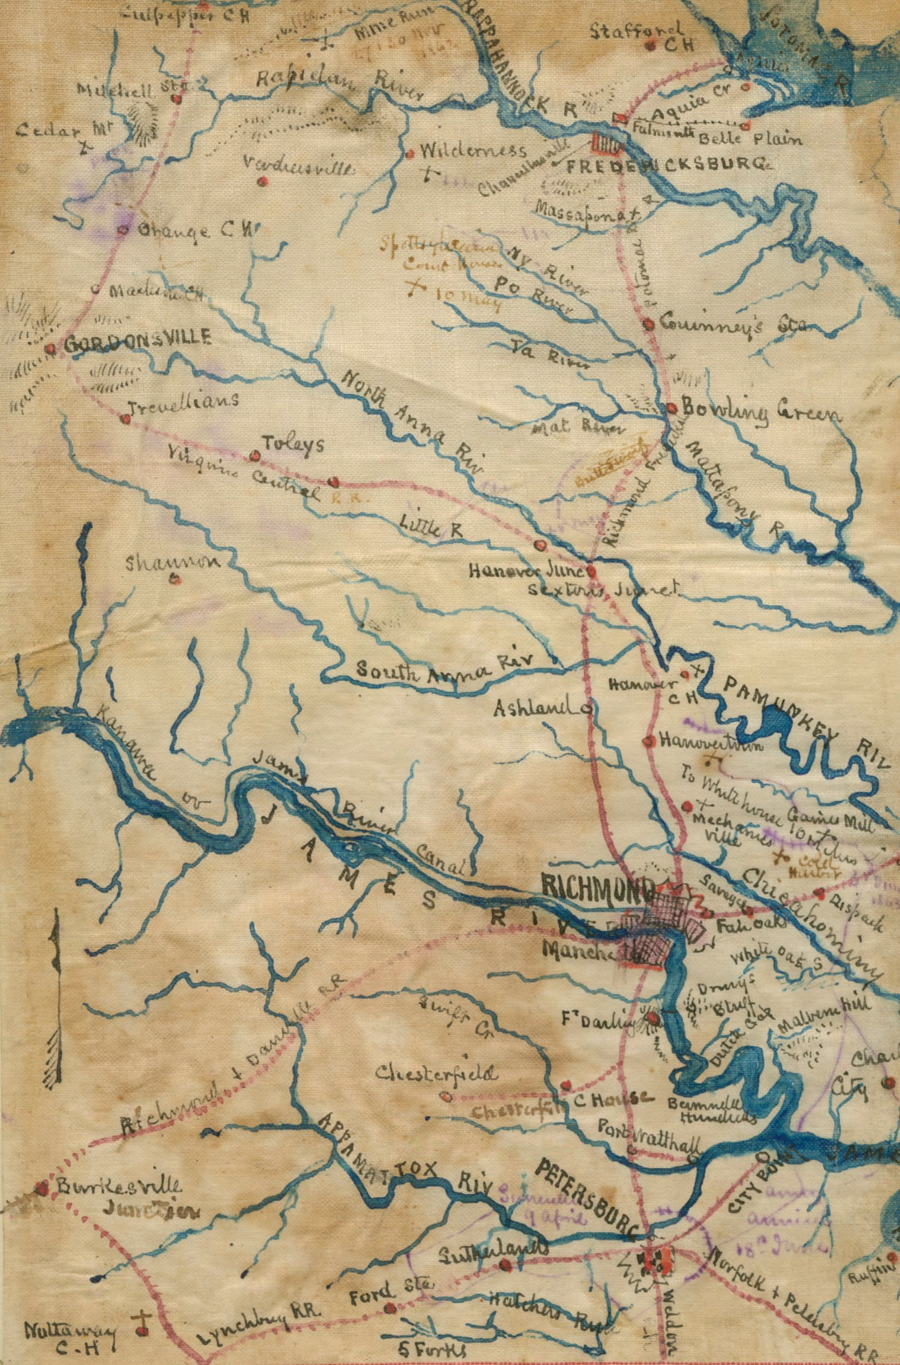 until 1872, the northern end of the Richmond, Fredericksburg, and Potomac (RF&P) Railroad was Aquia Landing on the Potomac River, where steamboats from Washington DC docked